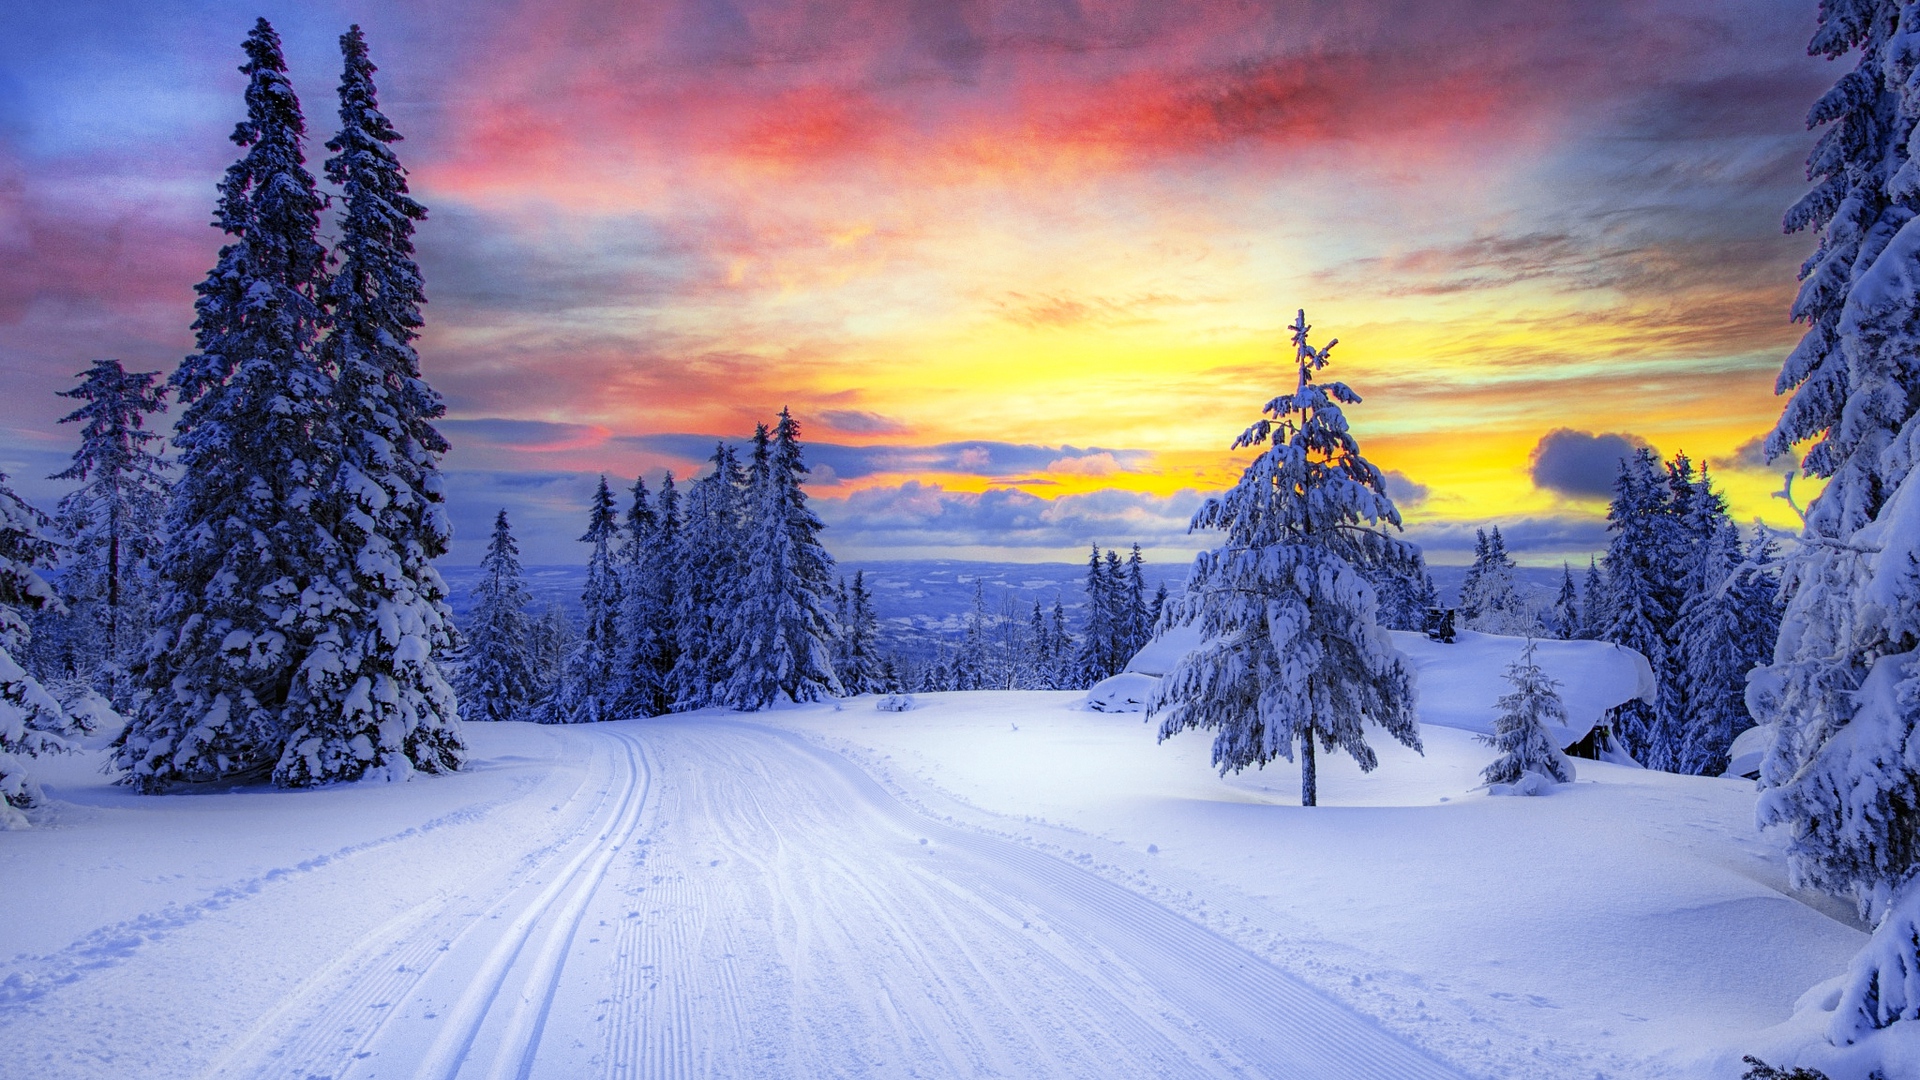 Download wallpaper 1920x1080 norway, winter, forest, snow